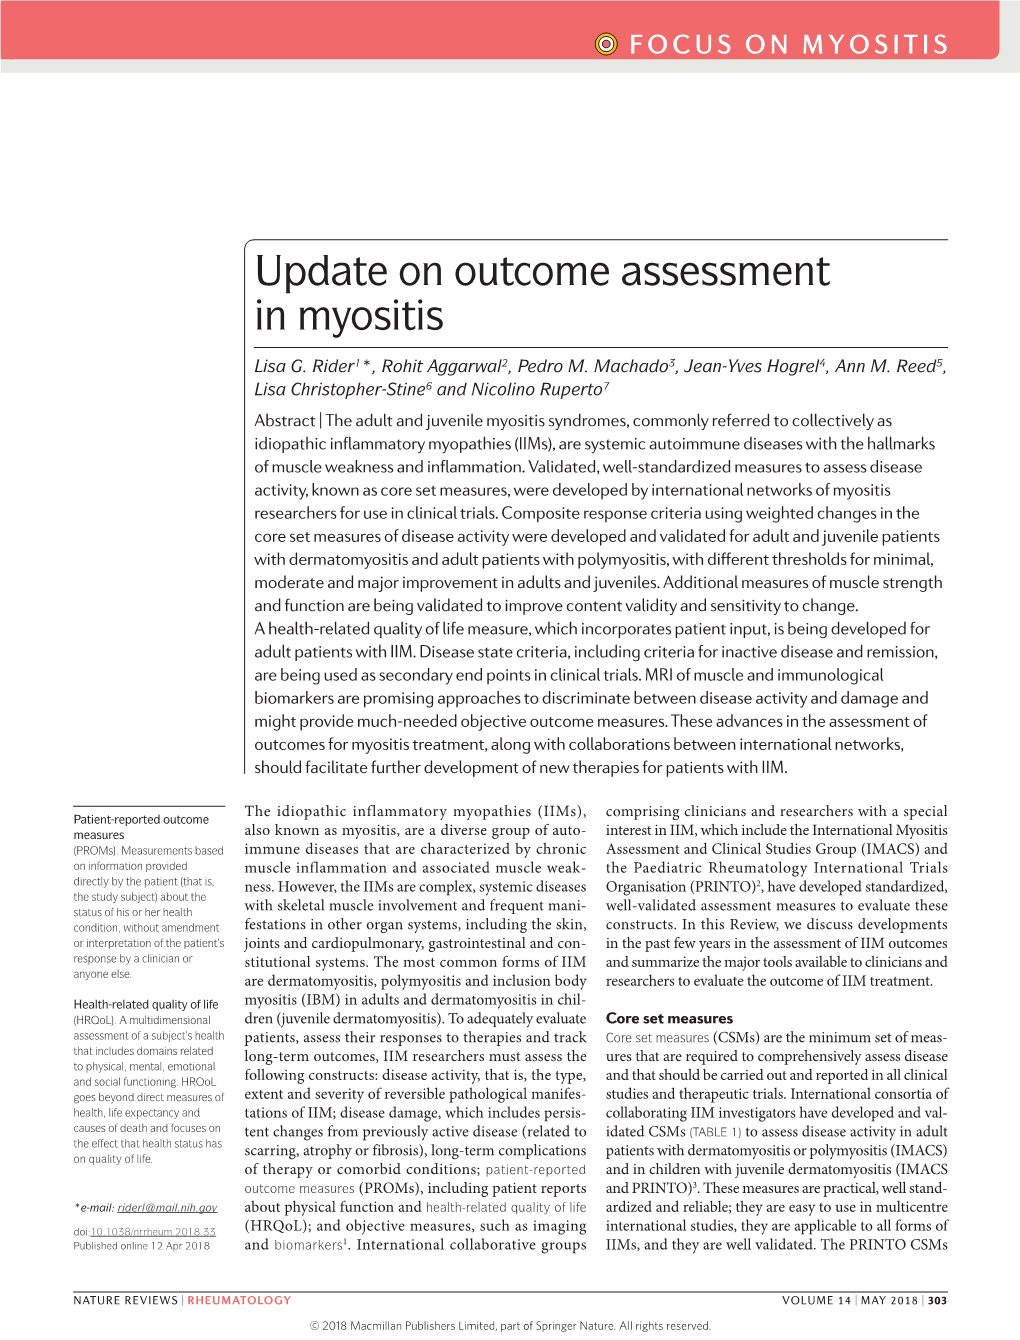 Update on Outcome Assessment in Myositis